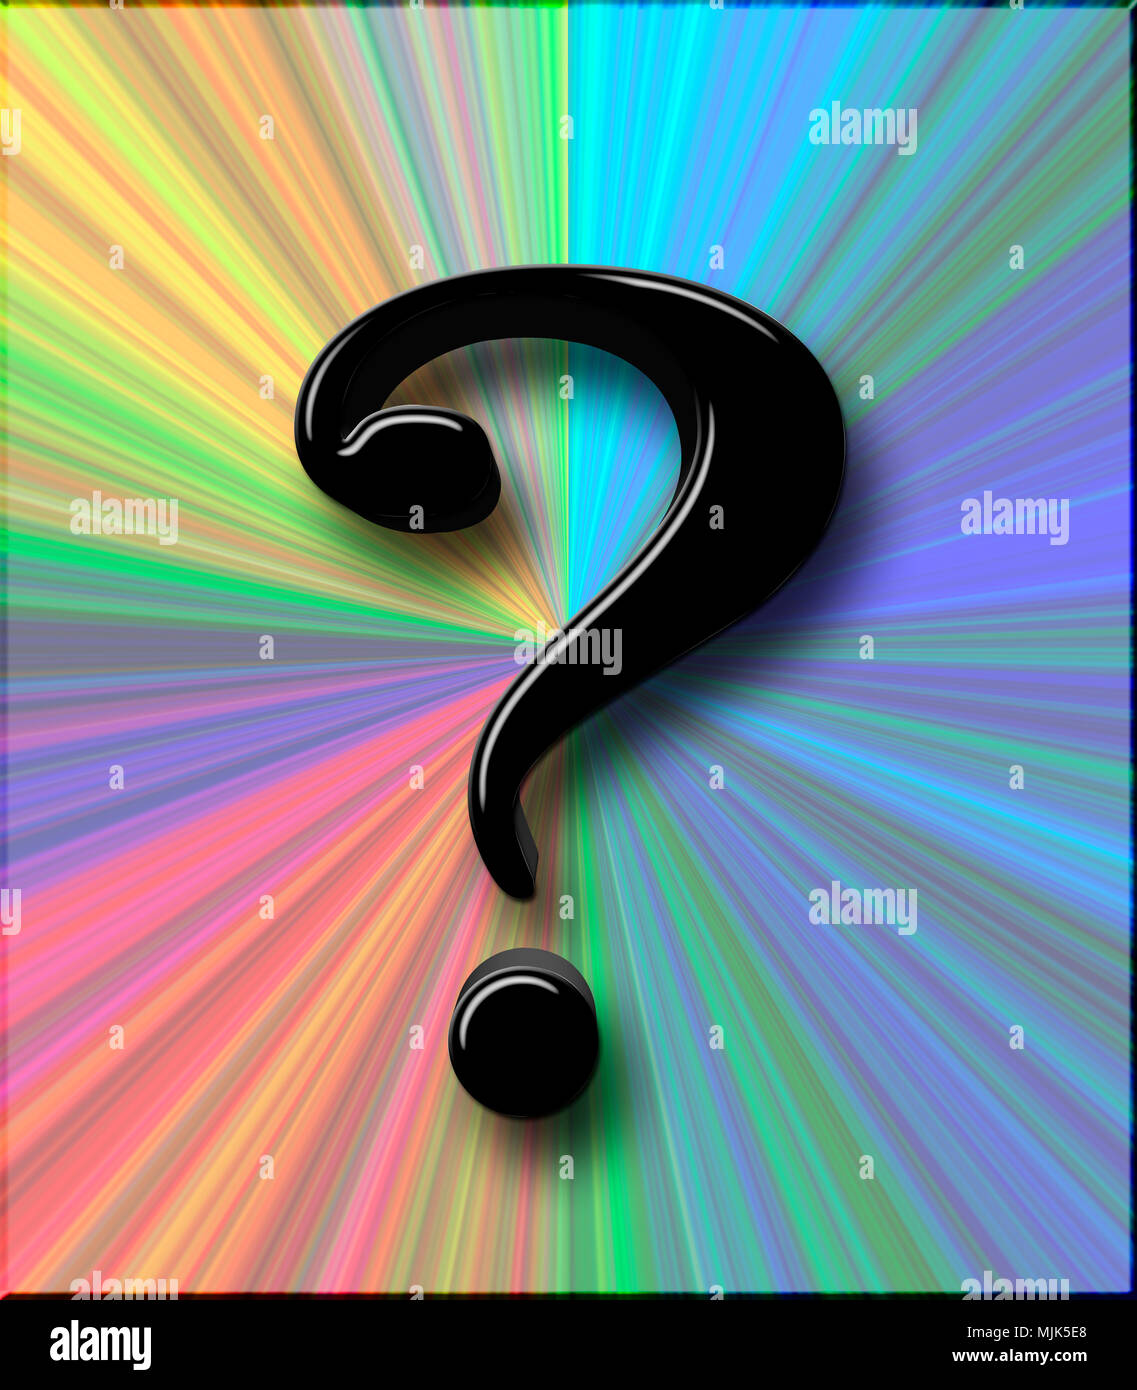 Stock Illustration - Large Three Dimensional Black Question Mark , 3D Illustration, Isolated against the Rainbow Background. Stock Photo